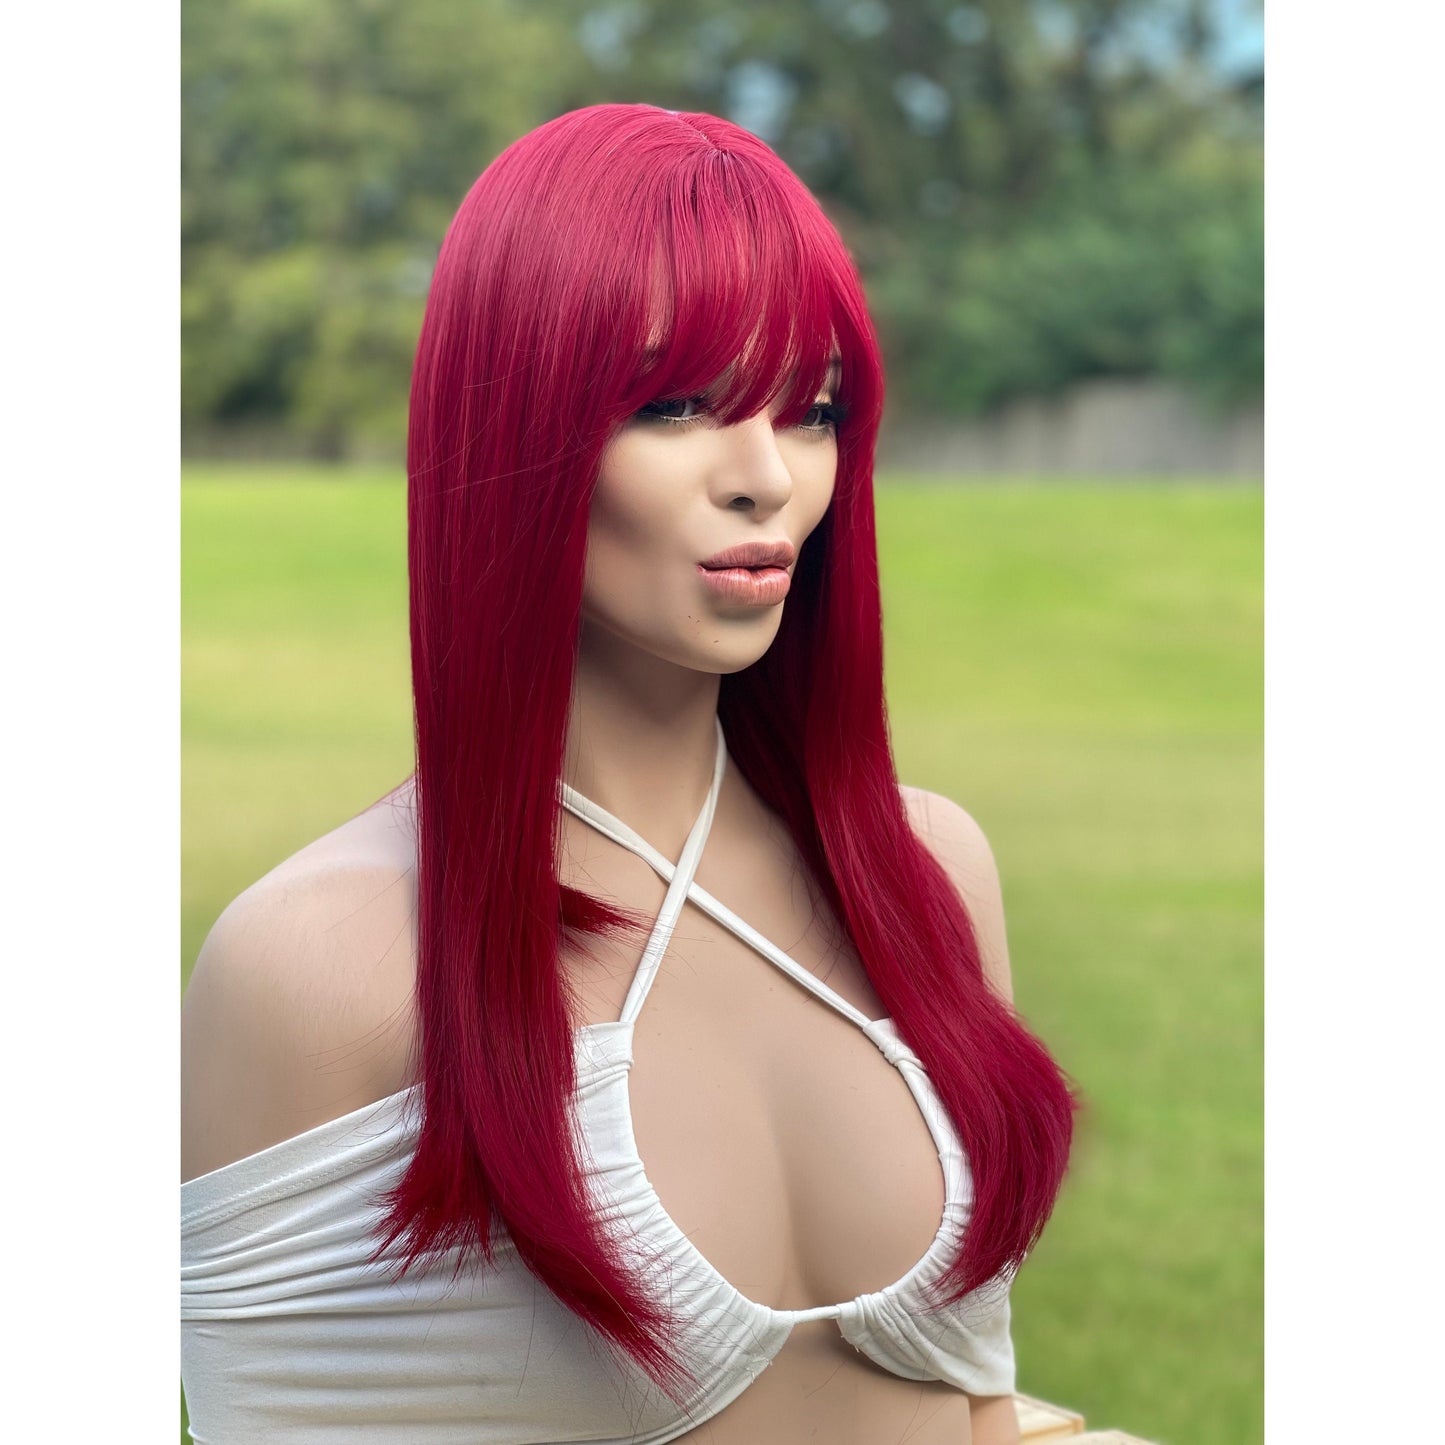 Red Long Straight Wig with Bangs, Luxury Heat Safe Human Hair Blend Wig